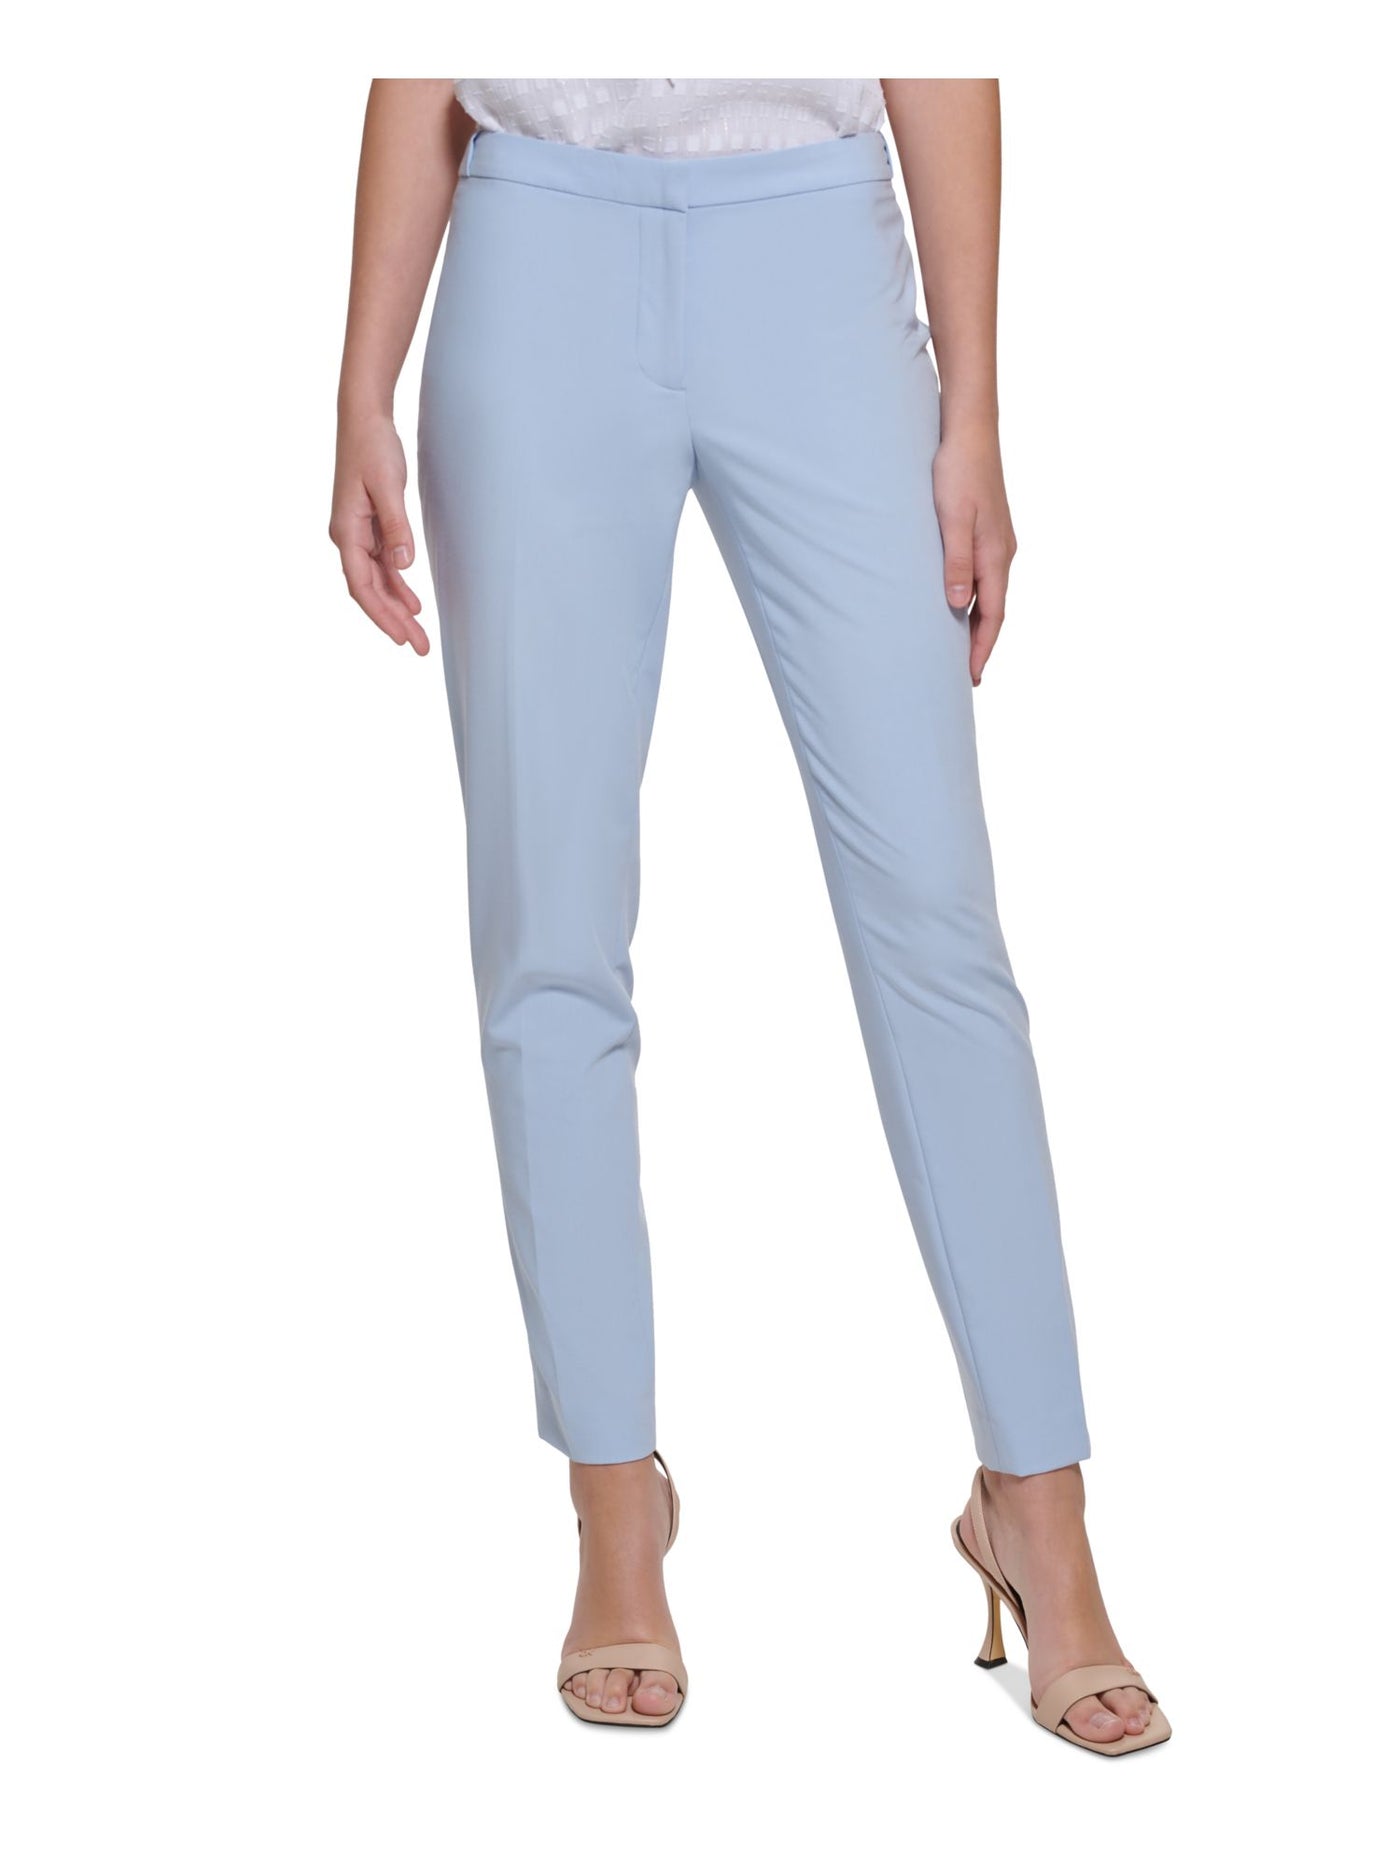 CALVIN KLEIN Womens Light Blue Zippered Pocketed Ankle Wear To Work Skinny Pants Petites 6P